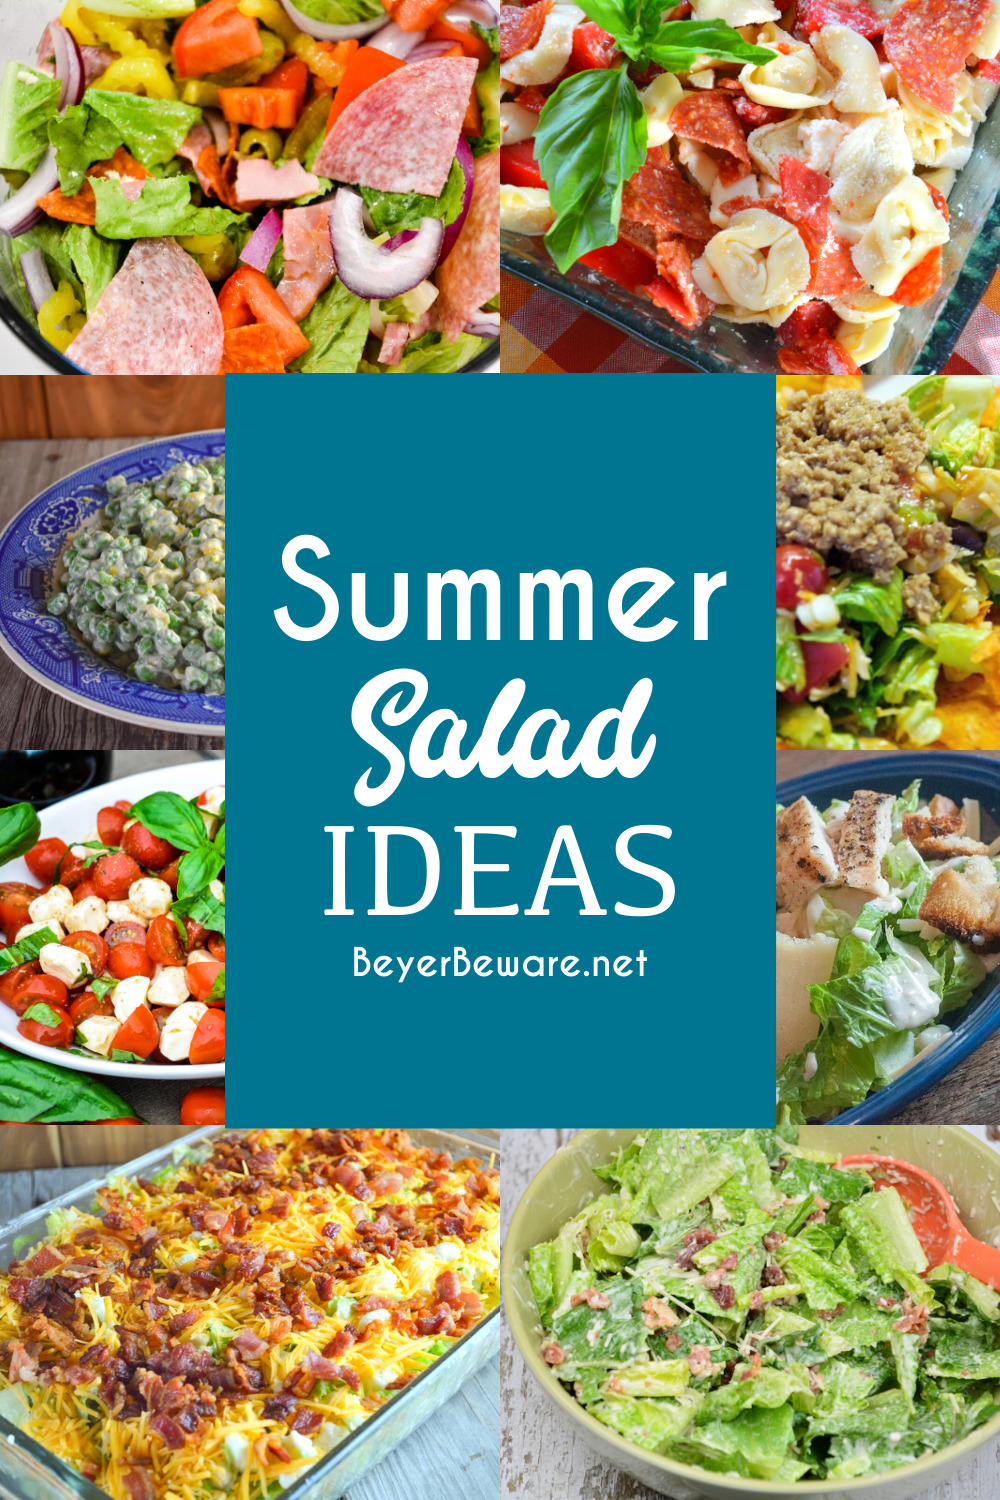 The perfect summer salad ideas.